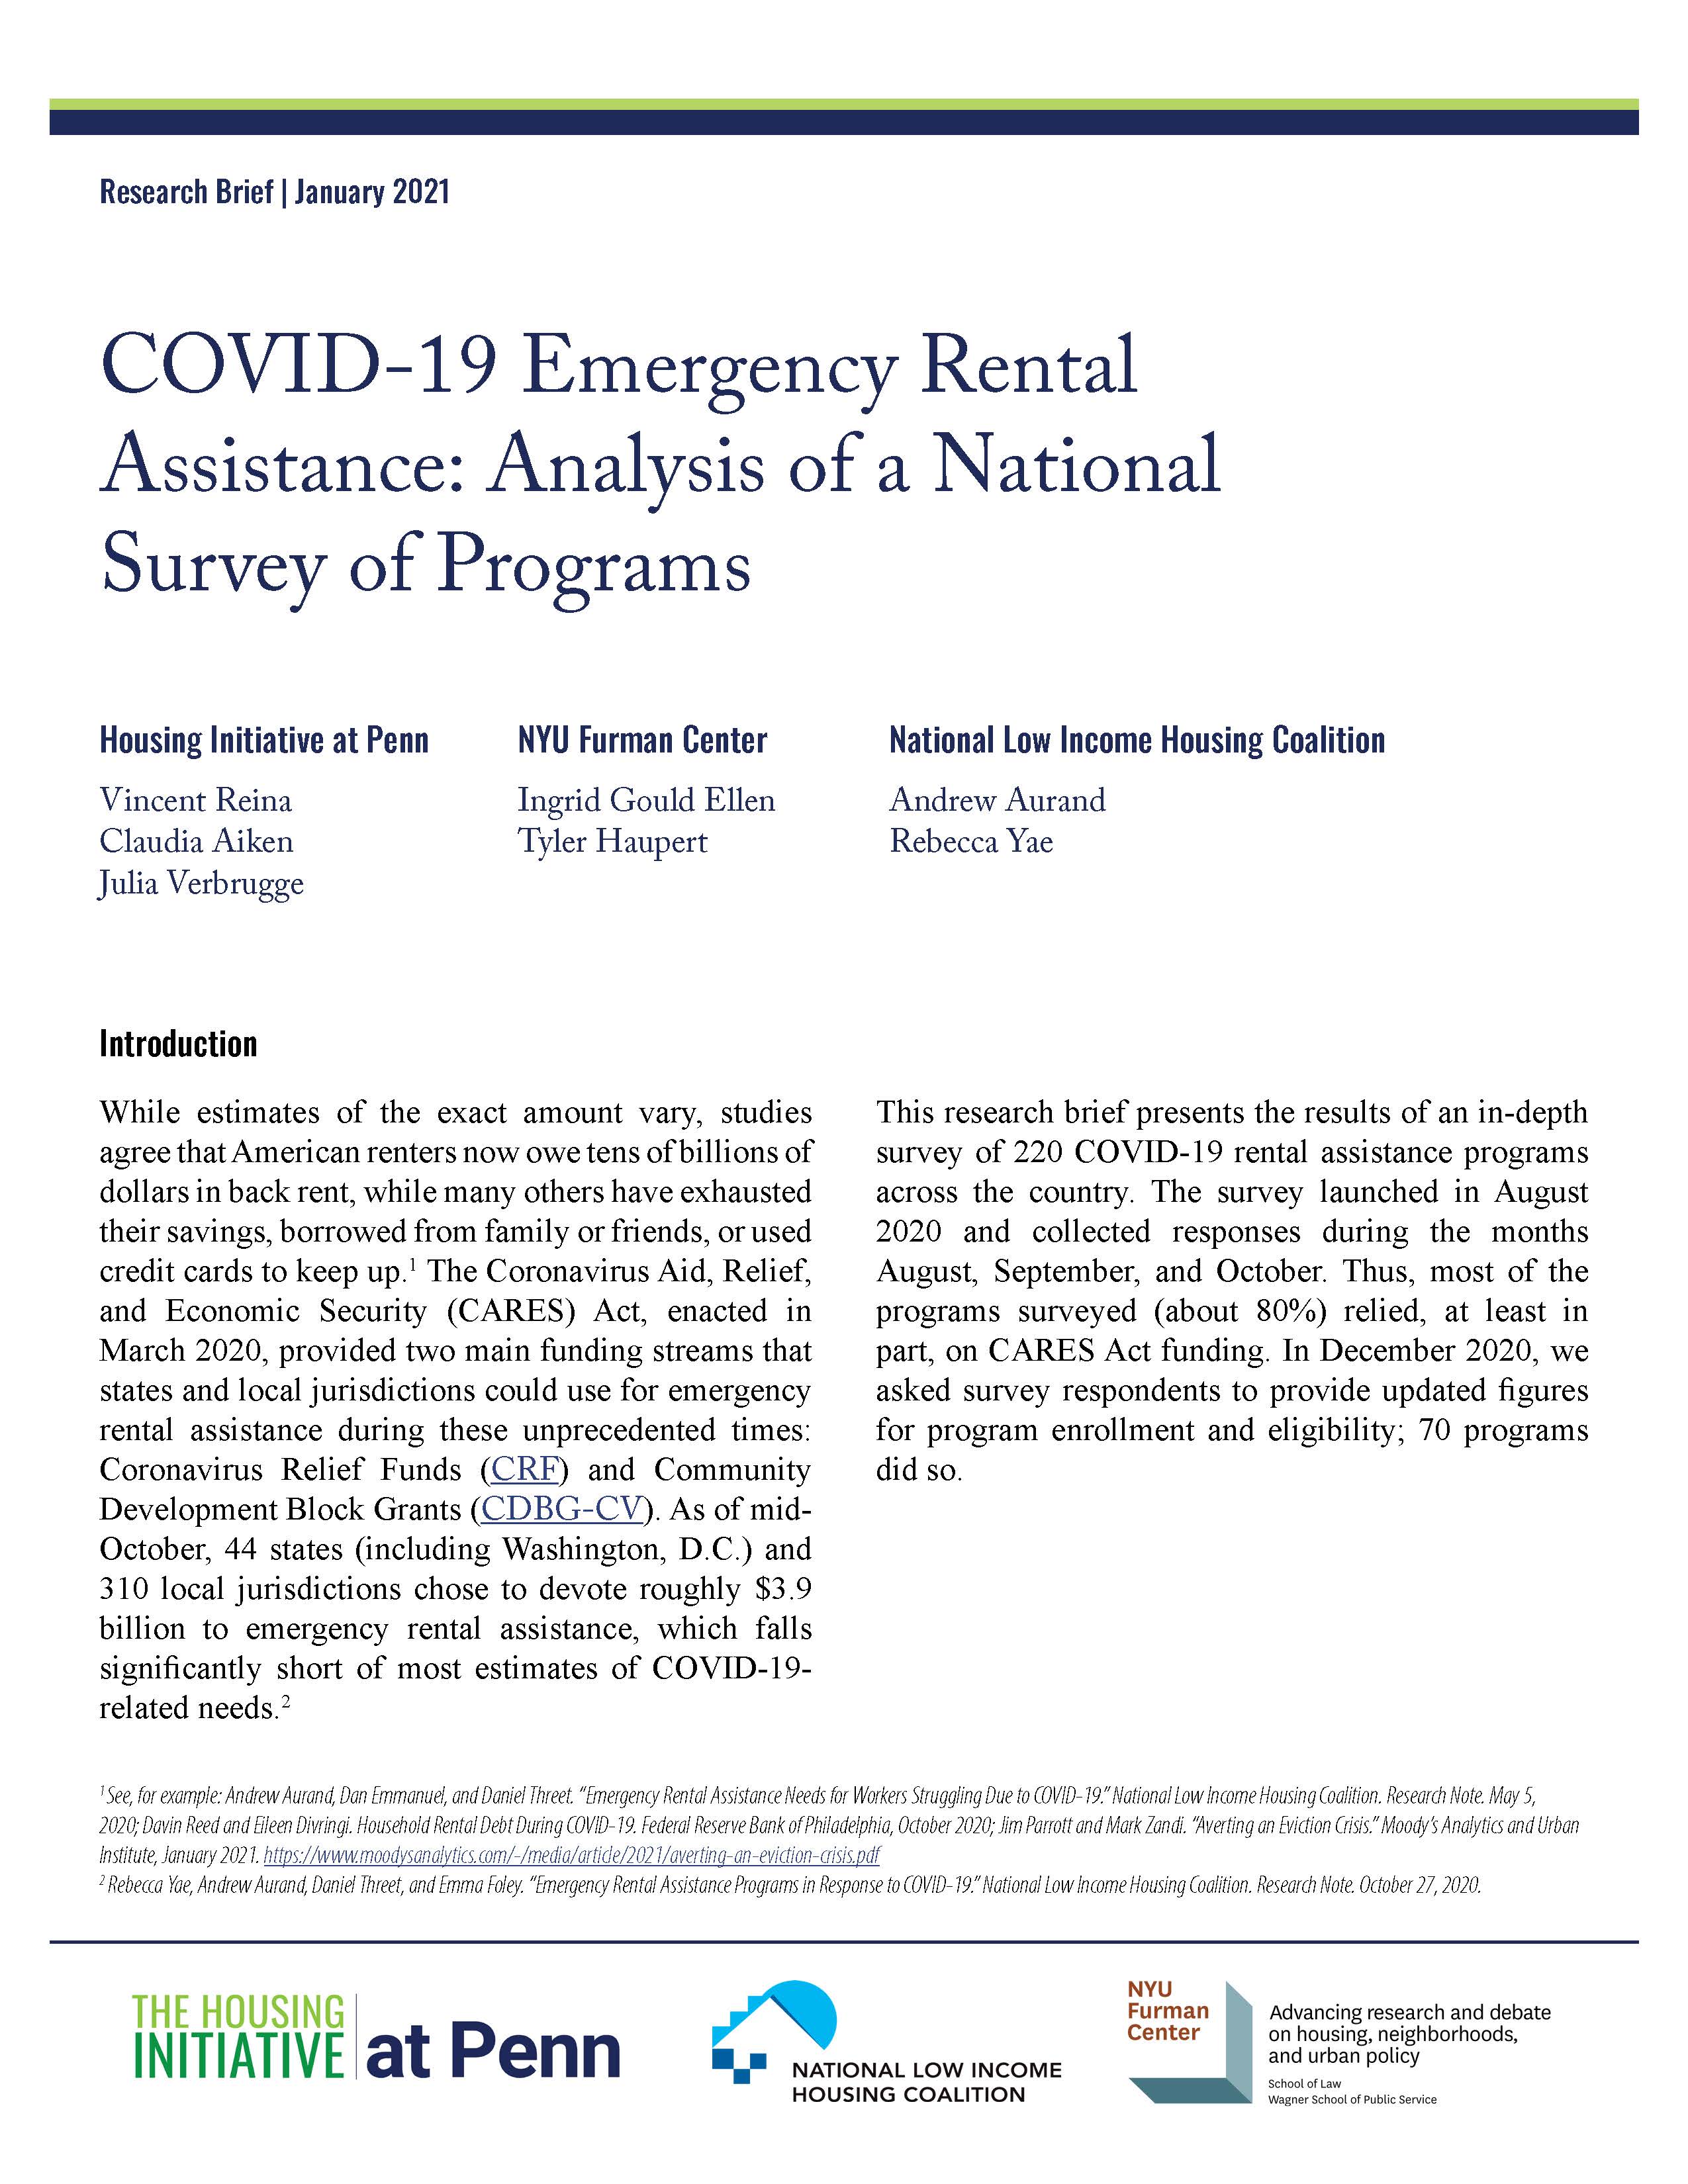 COVID-19 Emergency Rental Assistance: Analysis of a National Survey of Programs